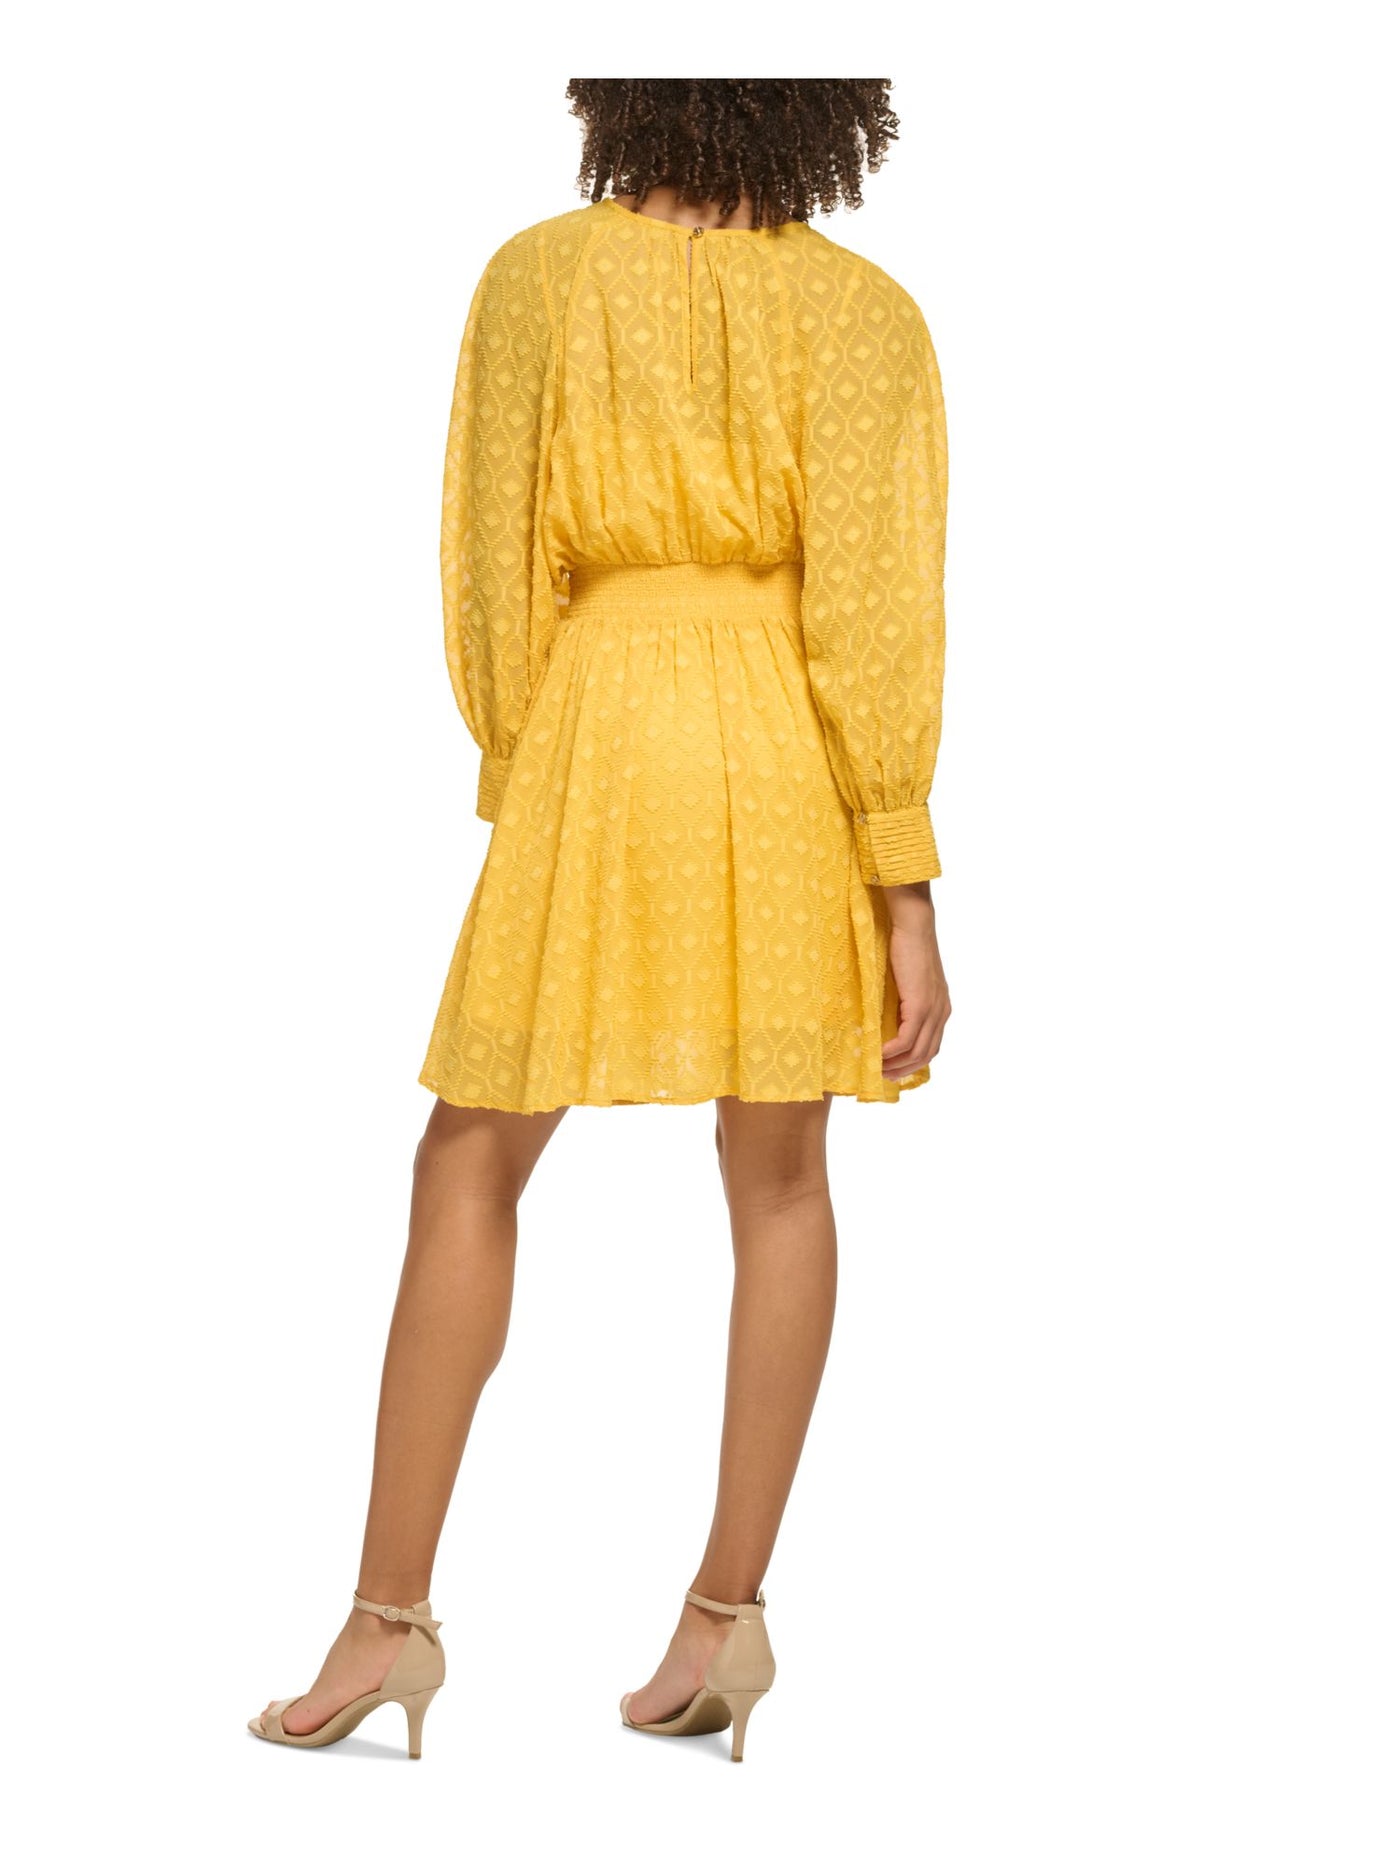 TOMMY HILFIGER Womens Yellow Textured Smocked Keyhole Back Lined Long Sleeve Square Neck Short Blouson Dress 16